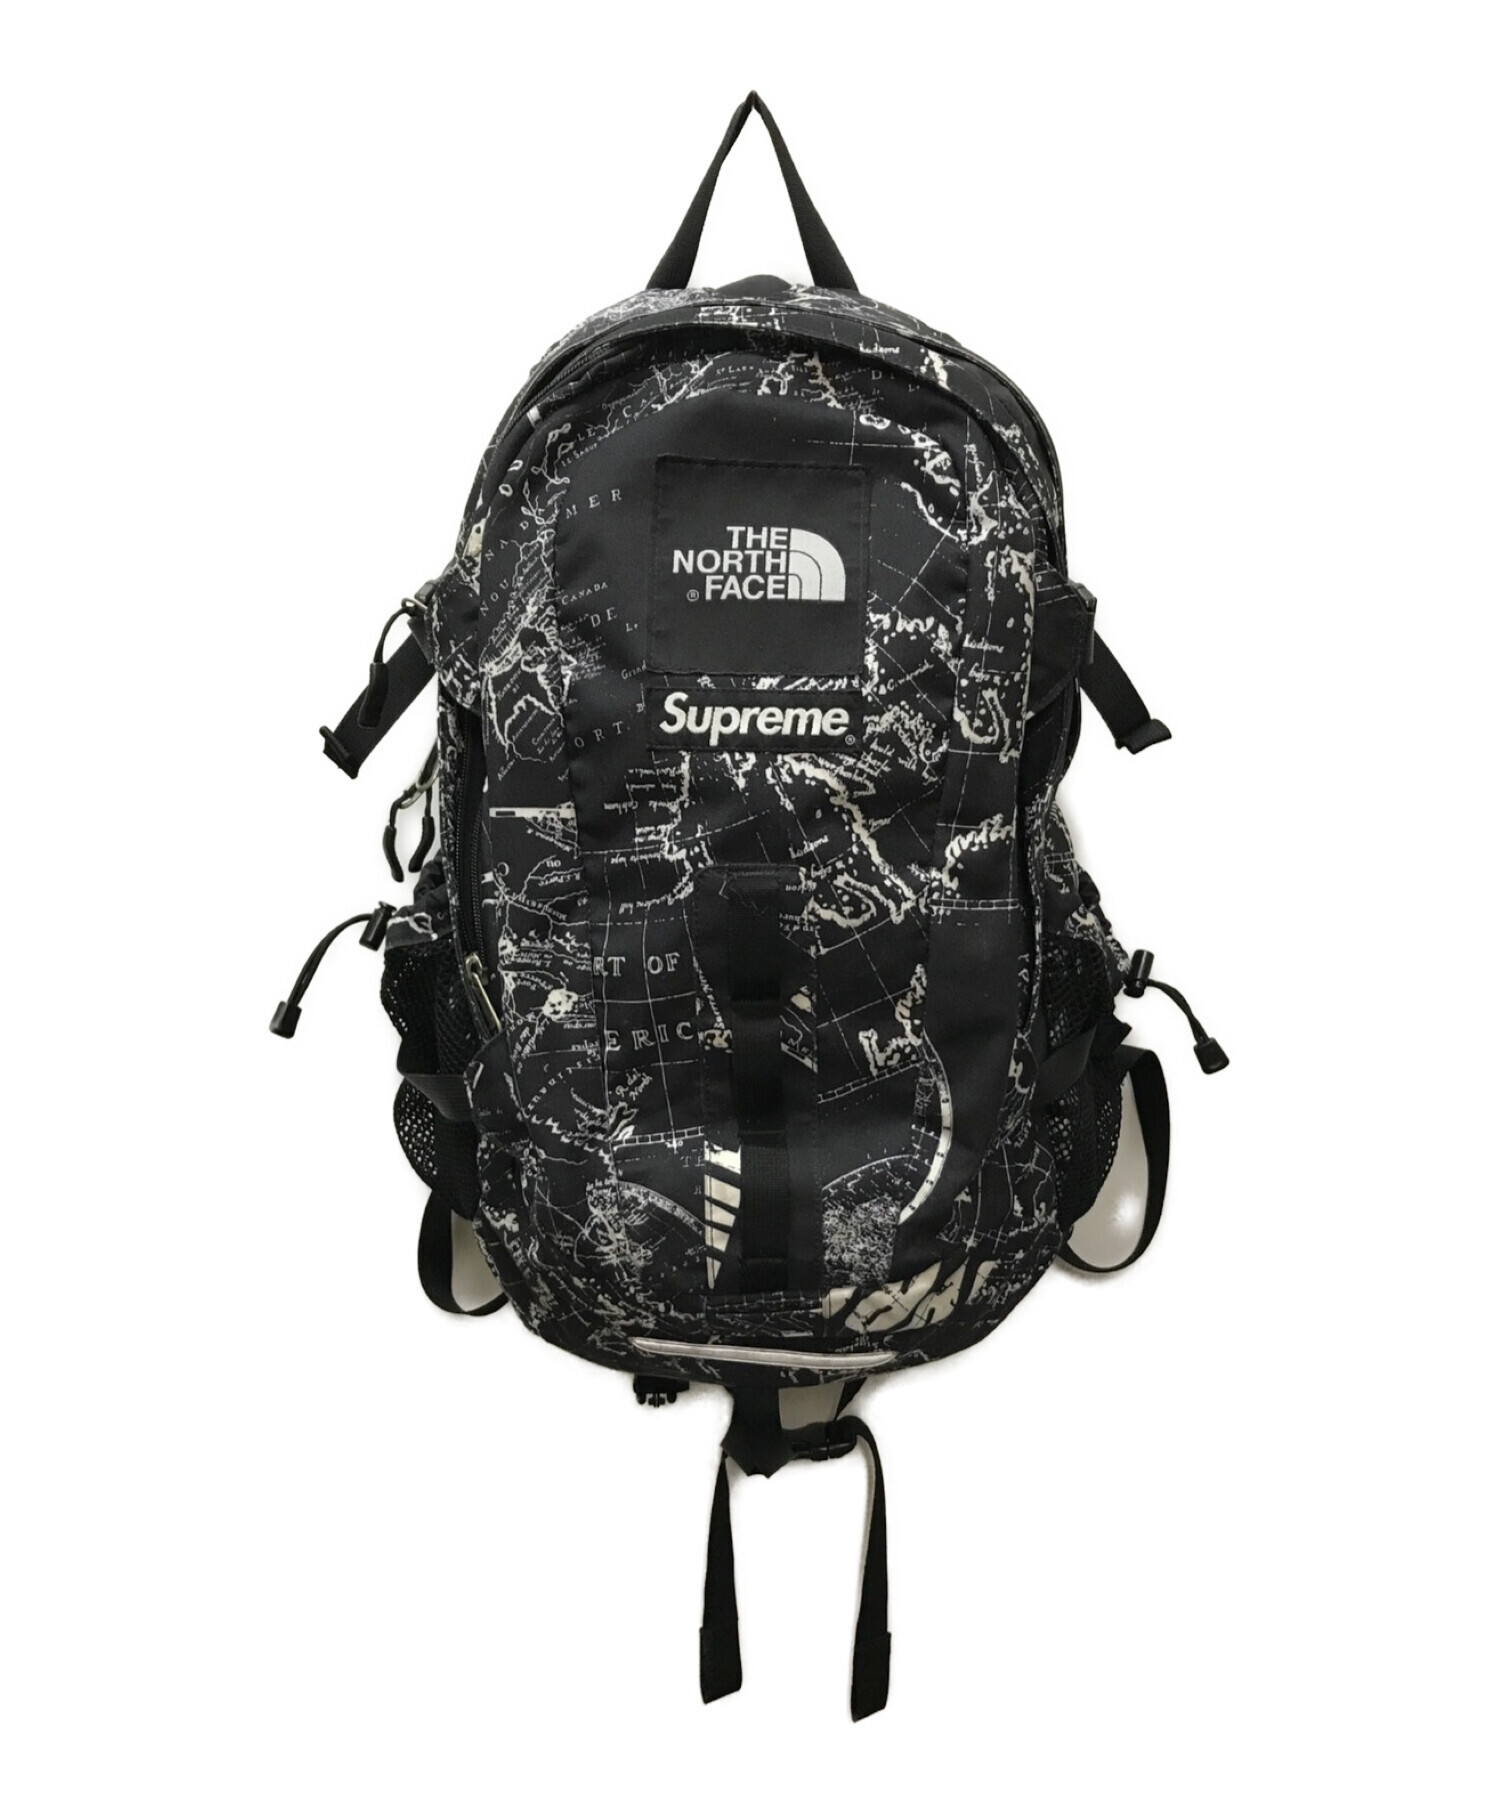 Supreme The North Face 12ss backpack